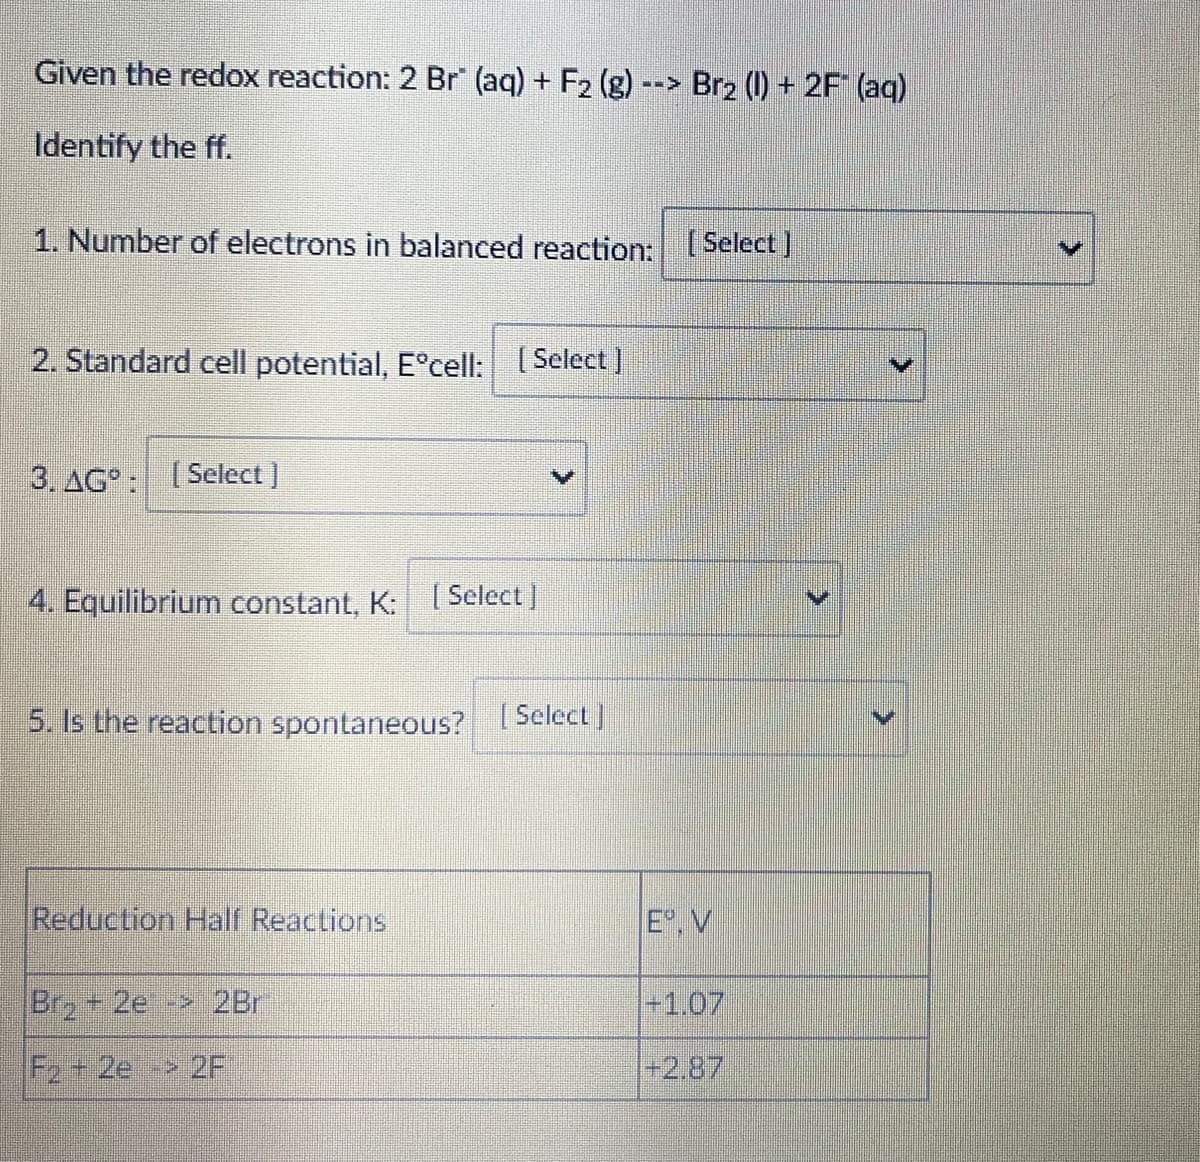 Given the redox reaction: 2 Br (aq) + F2 (g)
Br2 (1) + 2F (aq)
Identify the ff.
1. Number of electrons in balanced reaction: Select ]
2. Standard cell potential, E°cell: Select)
3. AG°: [Select ]
4. Equilibrium constant, K:
[ Select ]
5. Is the reaction spontaneous? Select]
Reduction Half Reactions
E,V
Brz+ 2e- 2Br
+1.07
F2+ 2e 2F
+2.87
